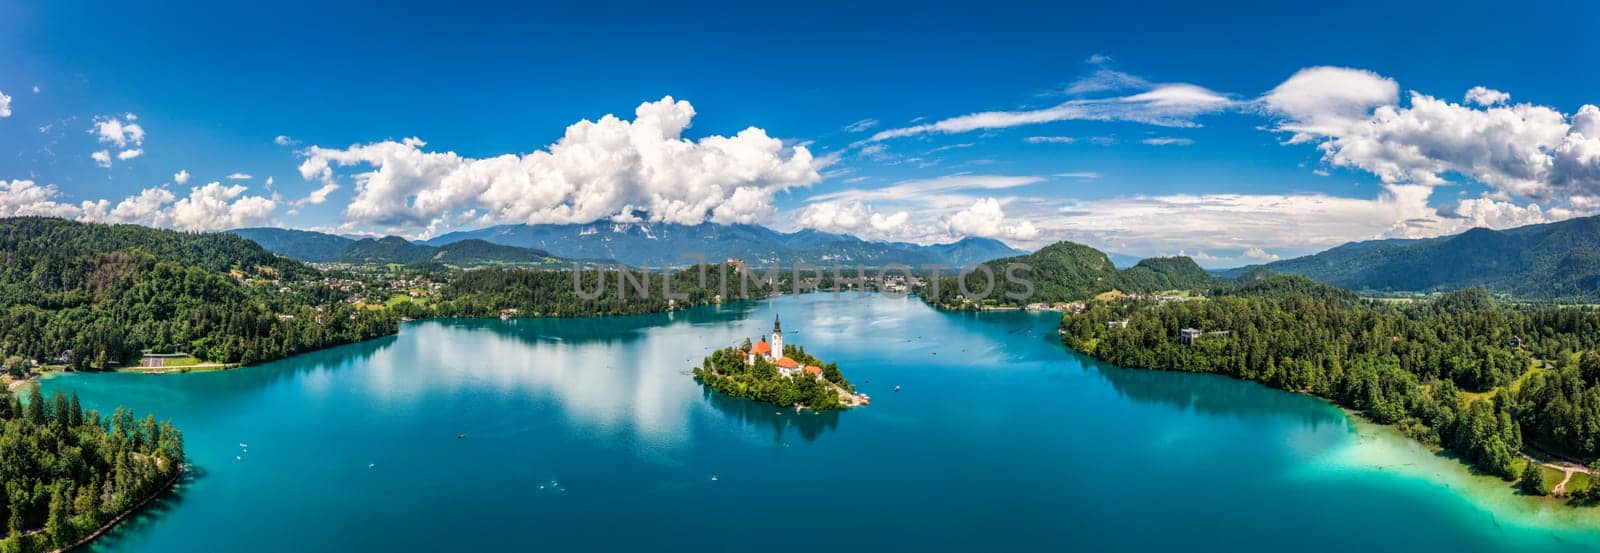 Lake Bled in Slovenia. Beautiful mountains and Bled lake with small Pilgrimage Church. Bled lake and island with Pilgrimage Church of the Assumption of Maria. Bled, Slovenia, Europe.